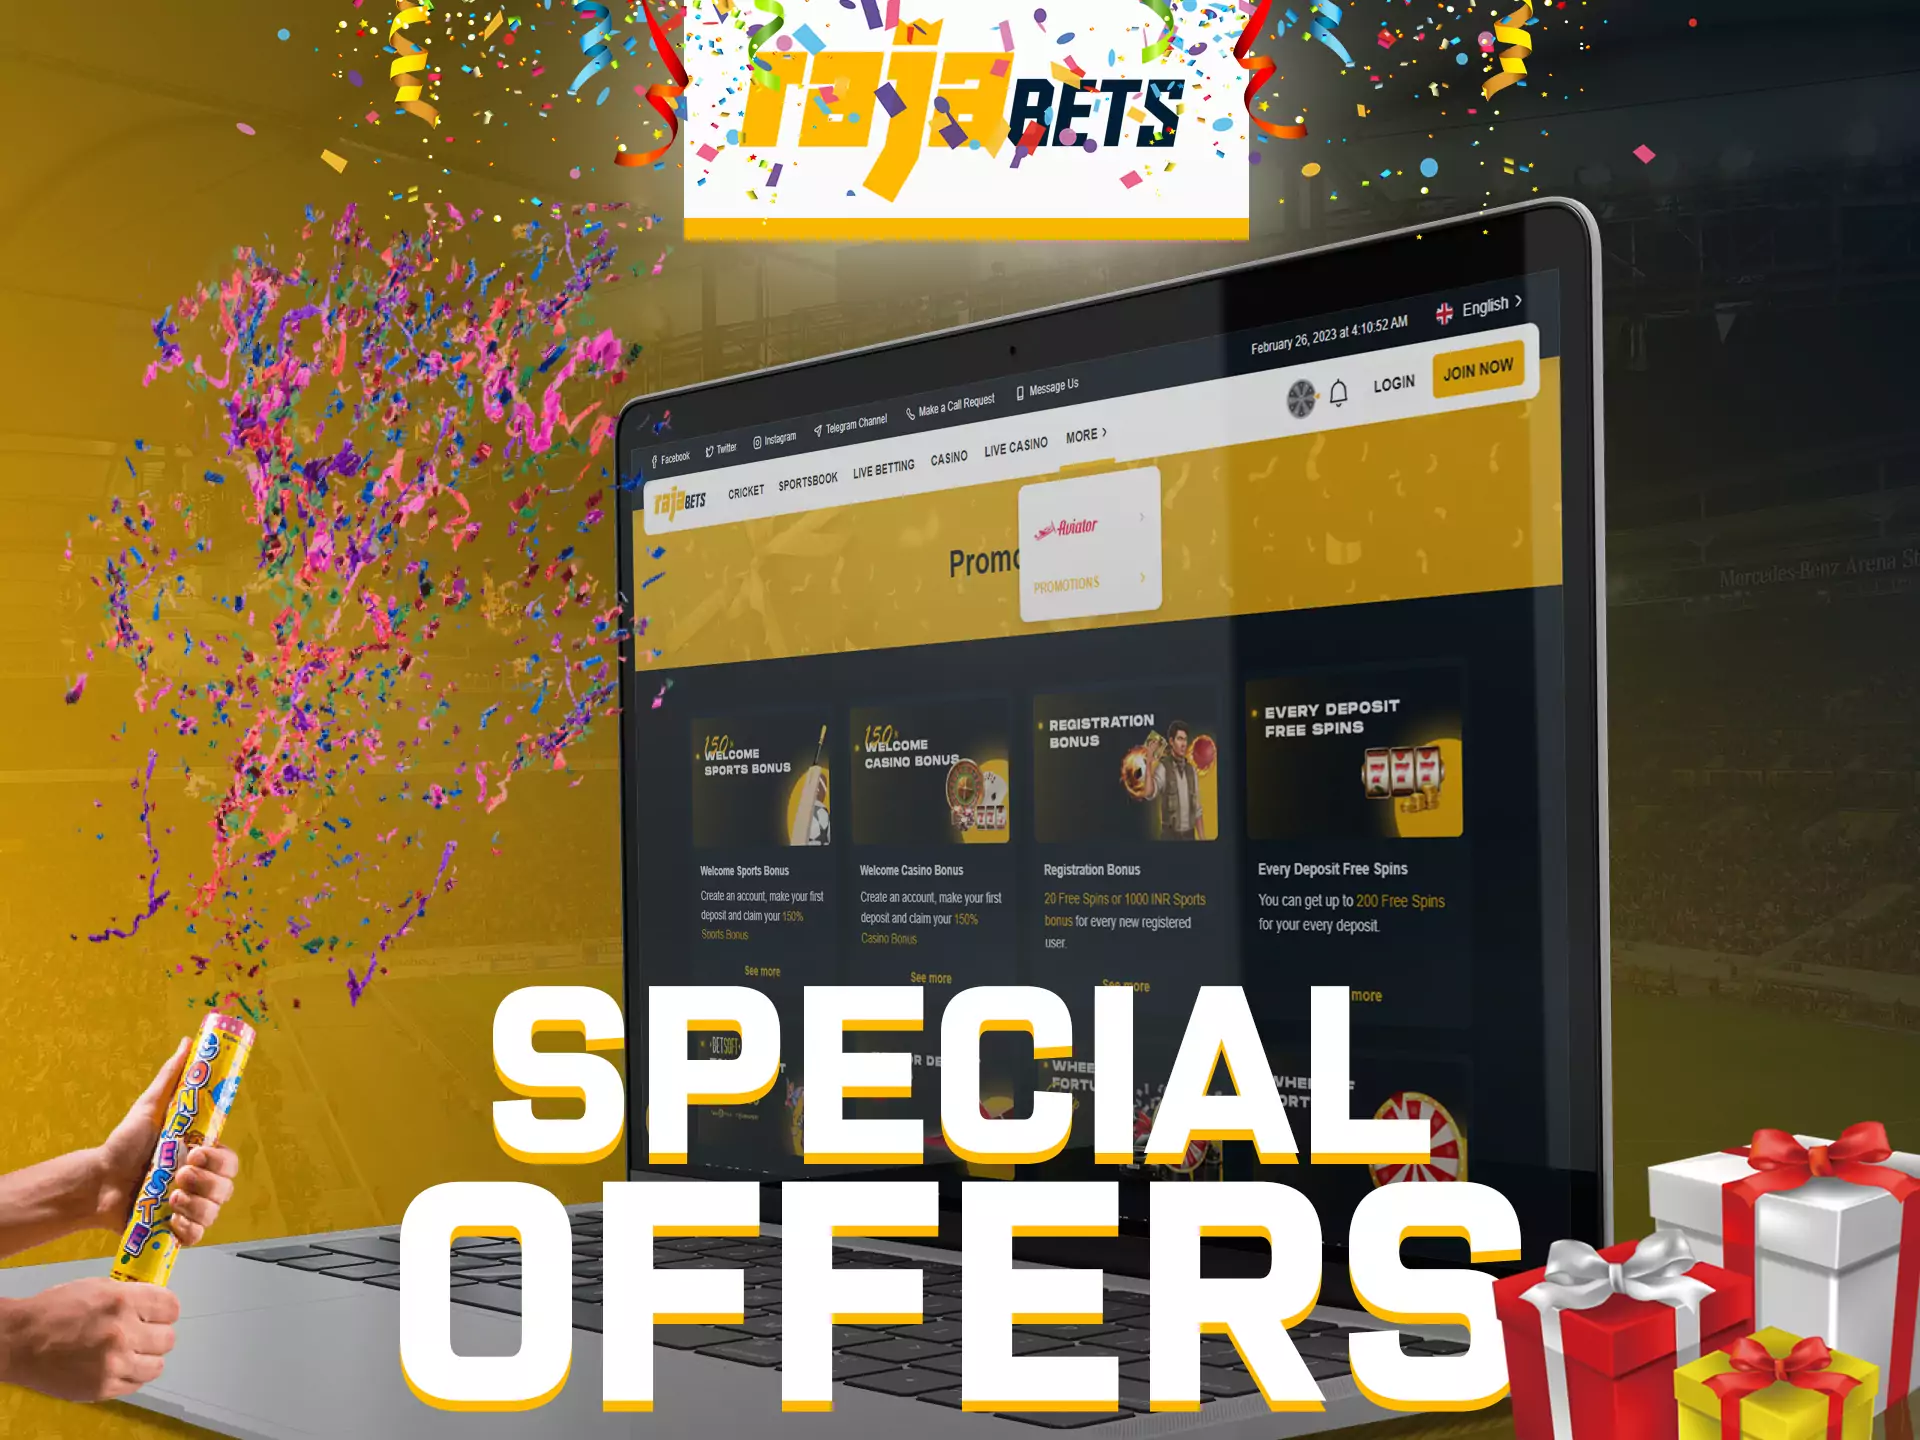 Rajabets has special offers for visitors and players.